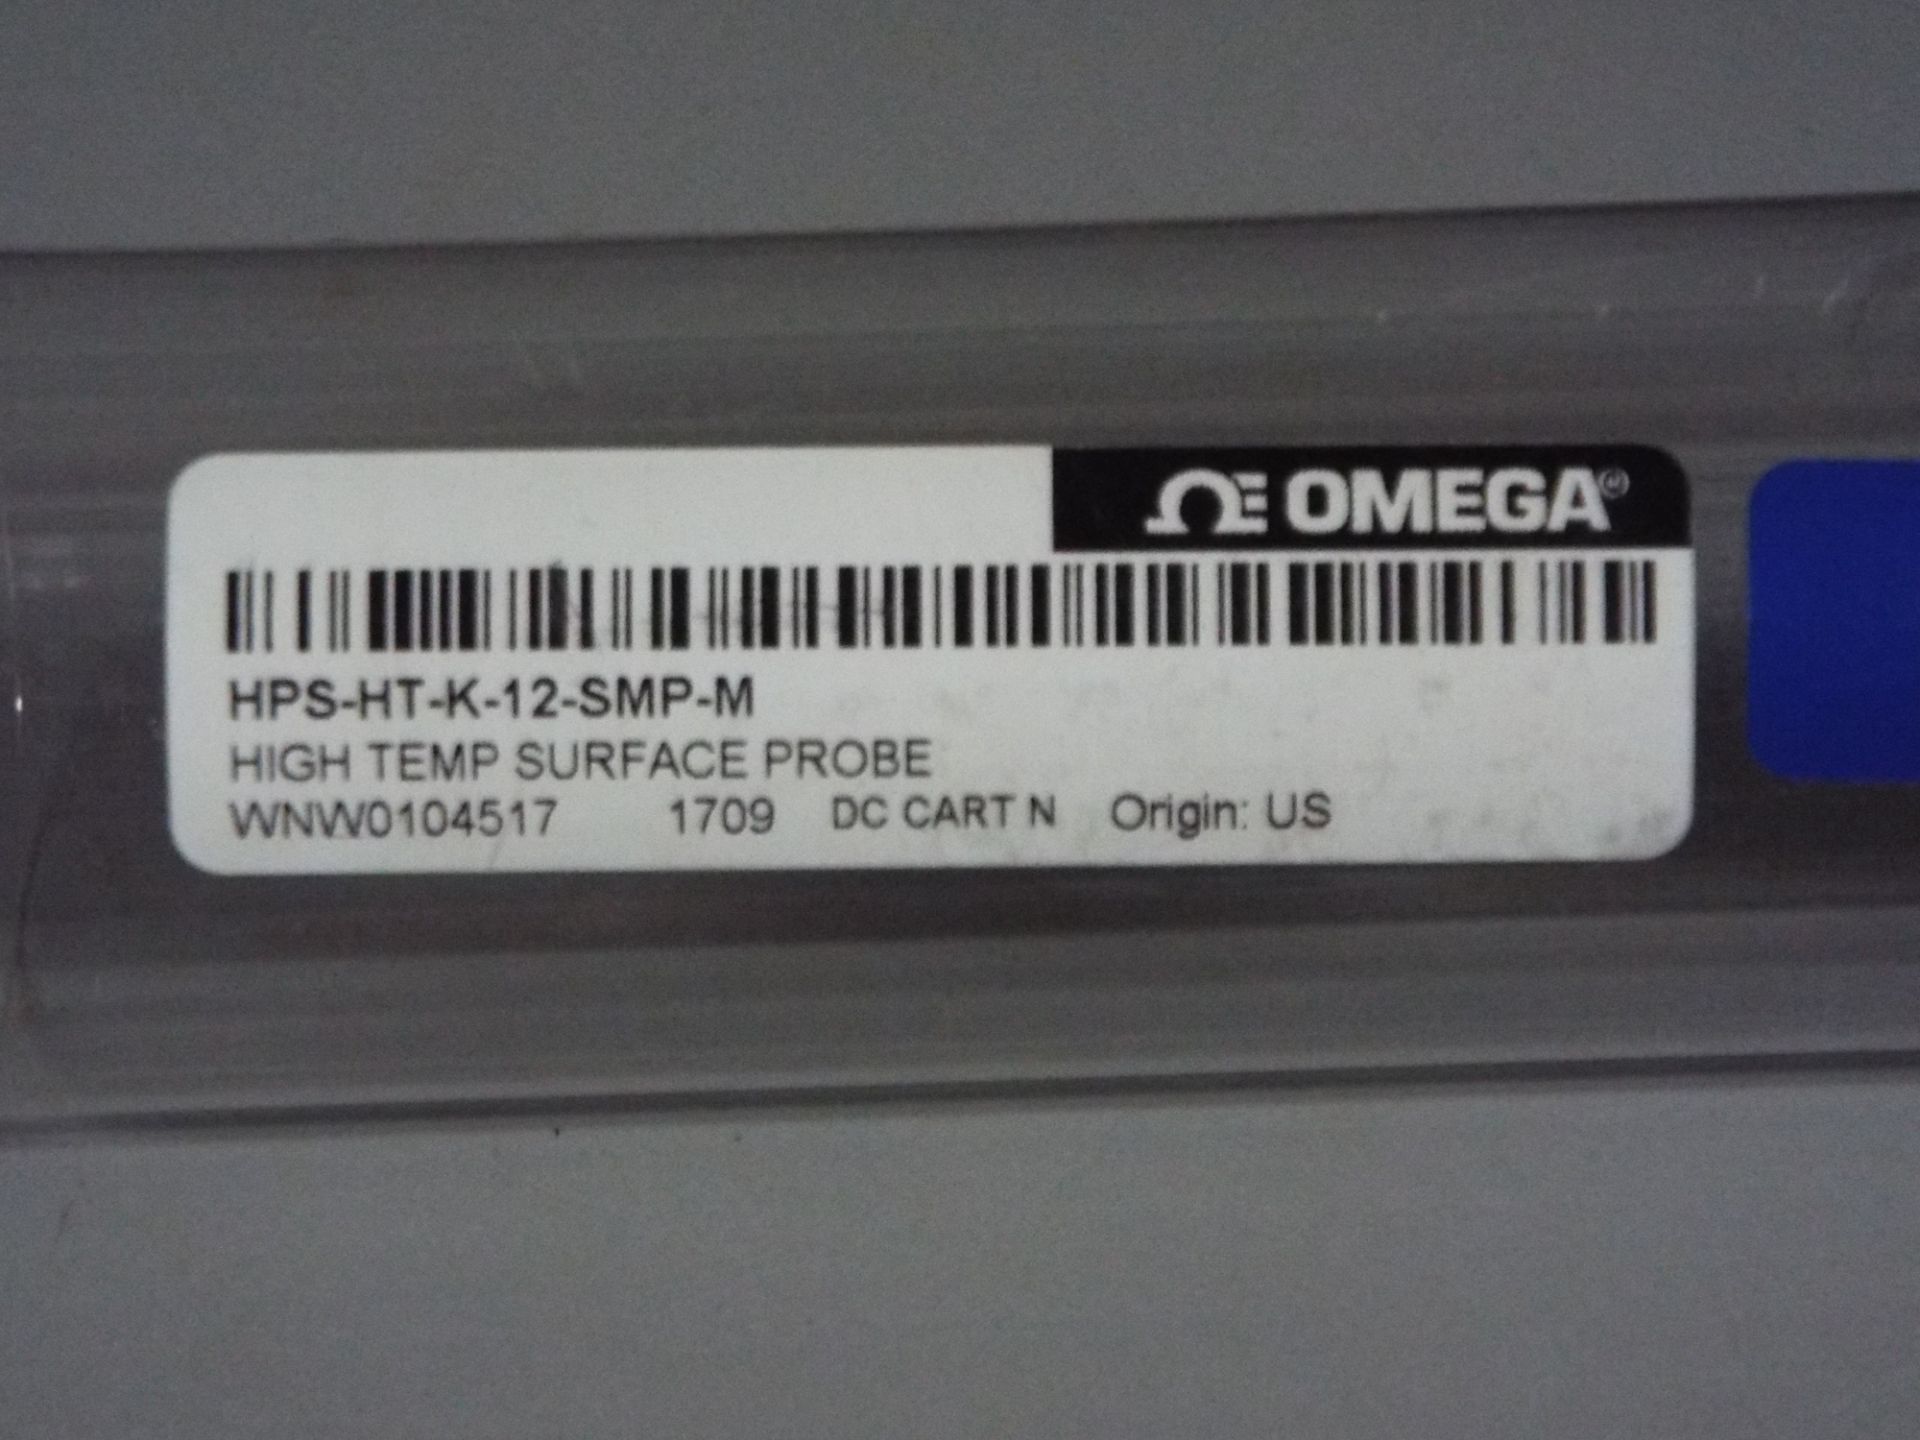 OMEGA HPS-HT-K-12-SMP-M HIGH TEMPERATURE SURFACE PROBE WITH 1100 DEG. CELSIUS MAX. RATING - Image 2 of 2